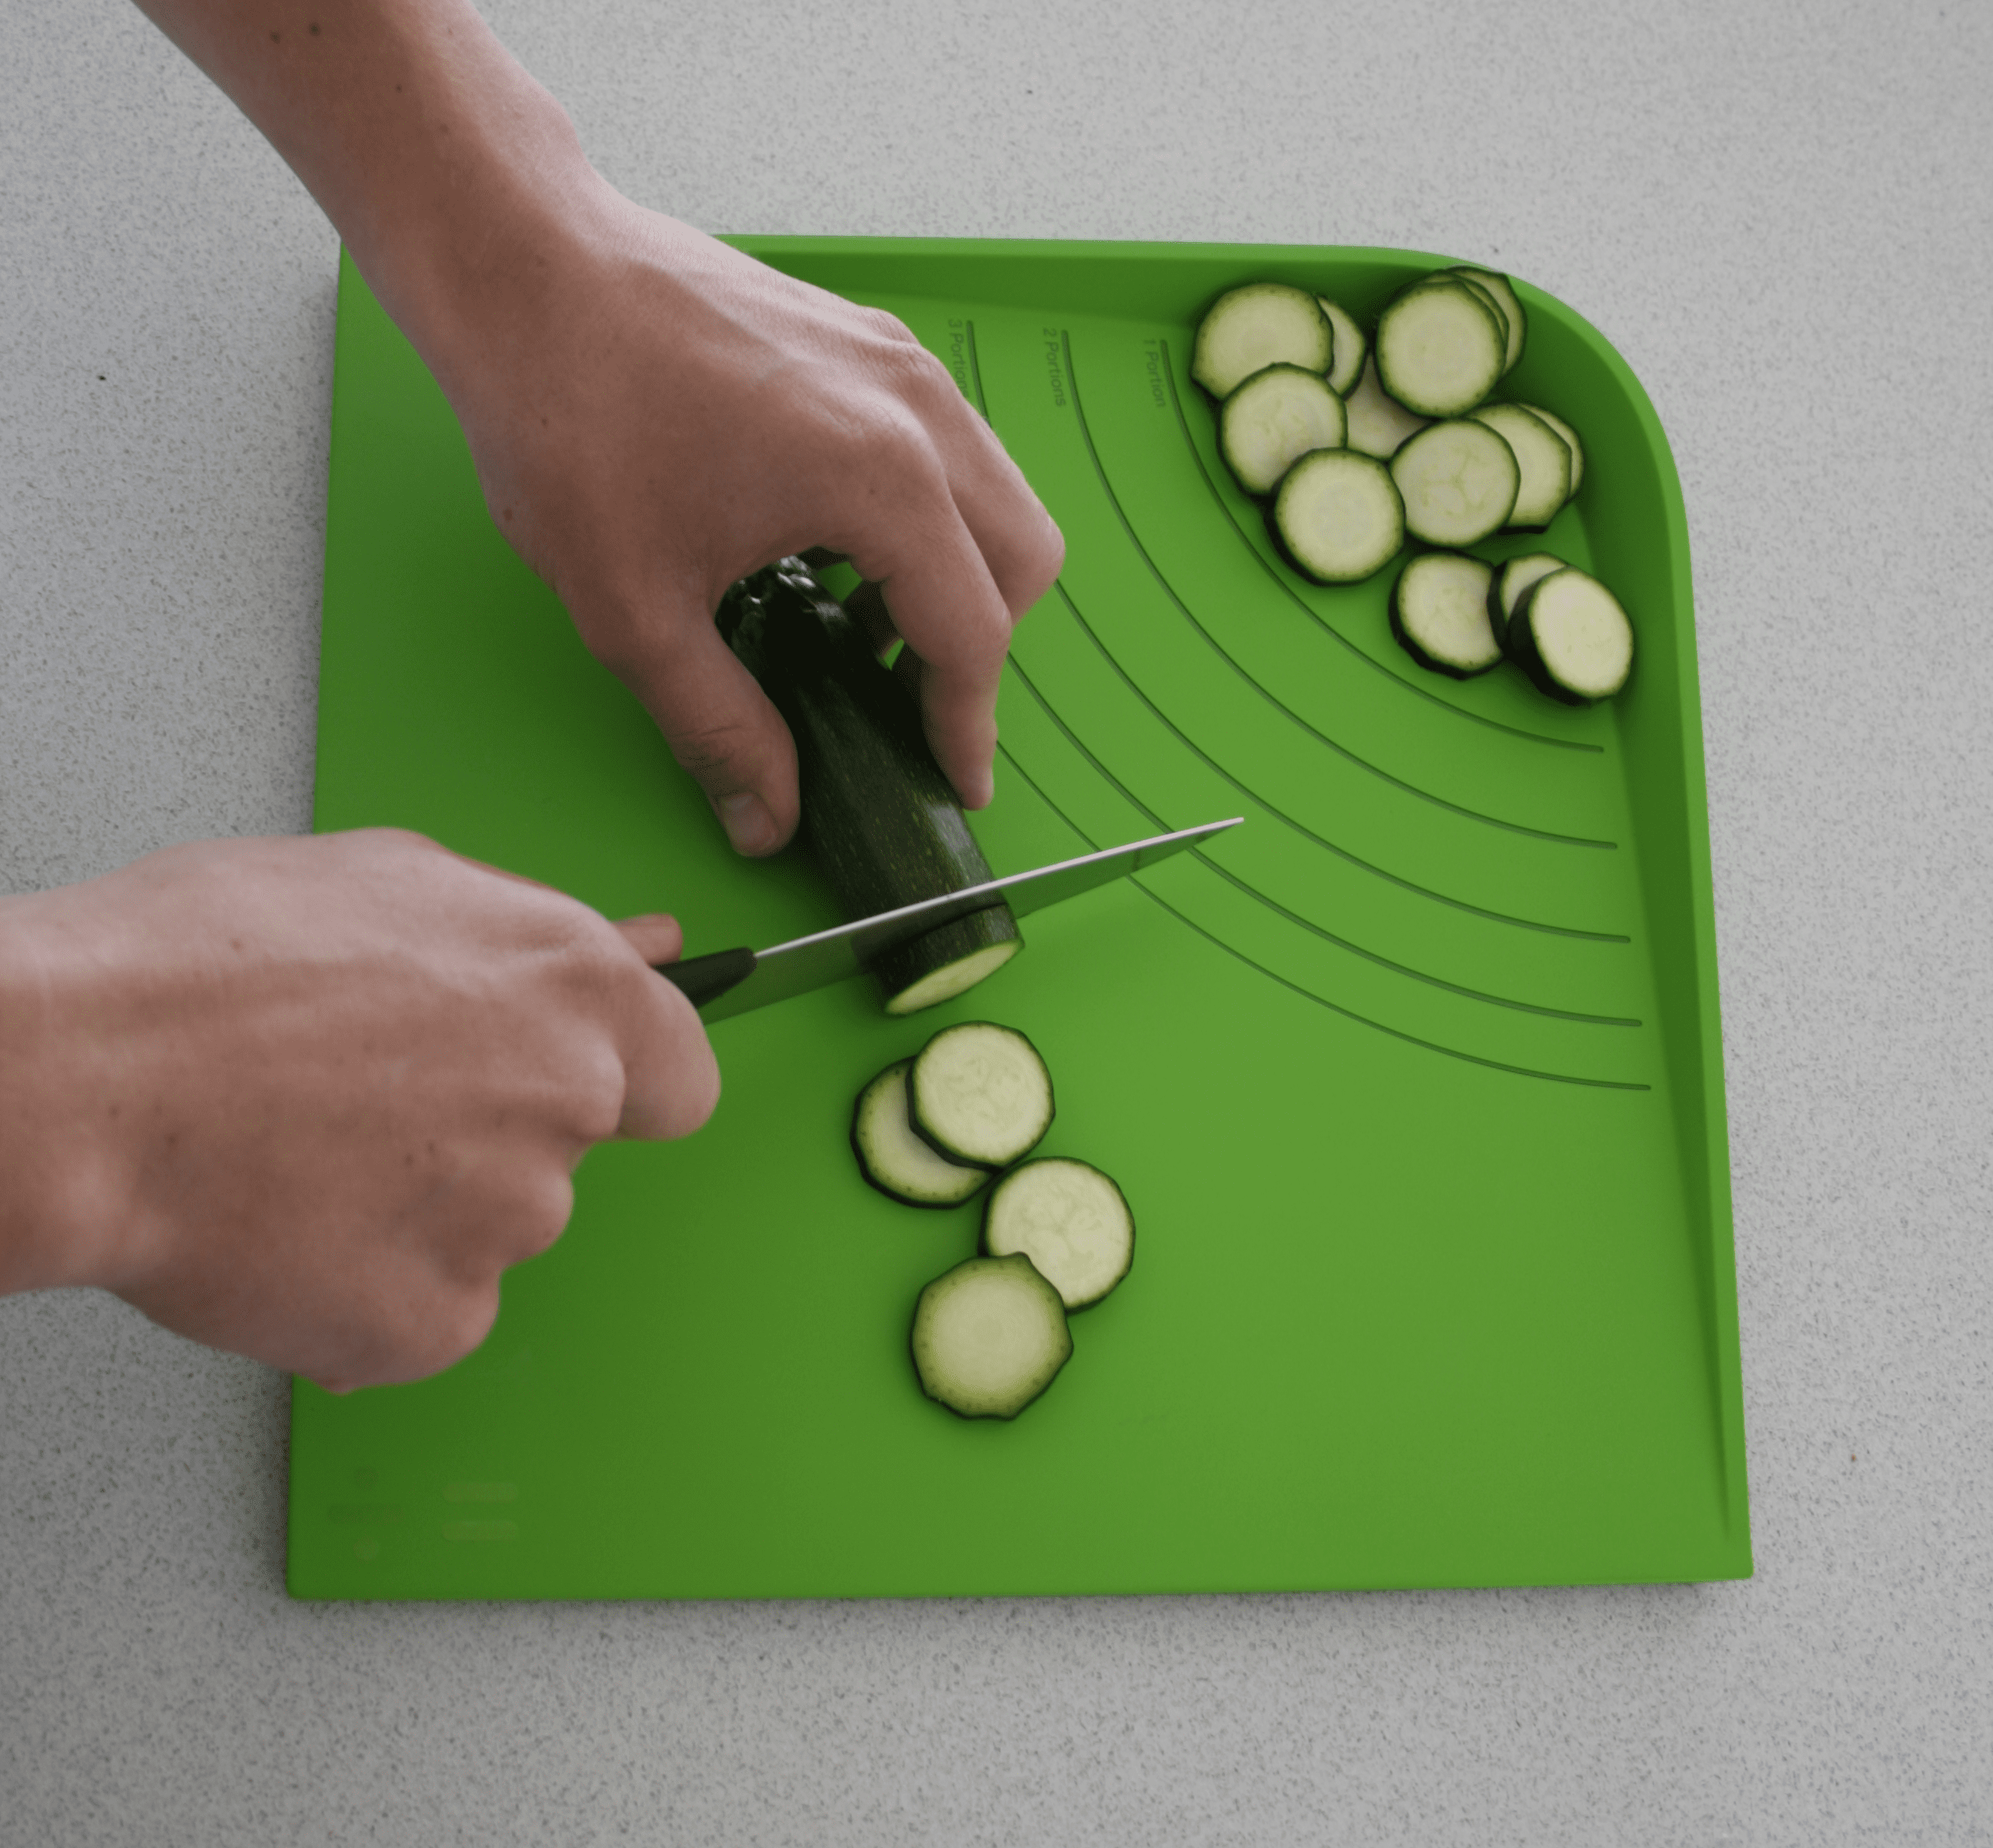 divide equally chopping board being used to measure the correct portion of vegetables